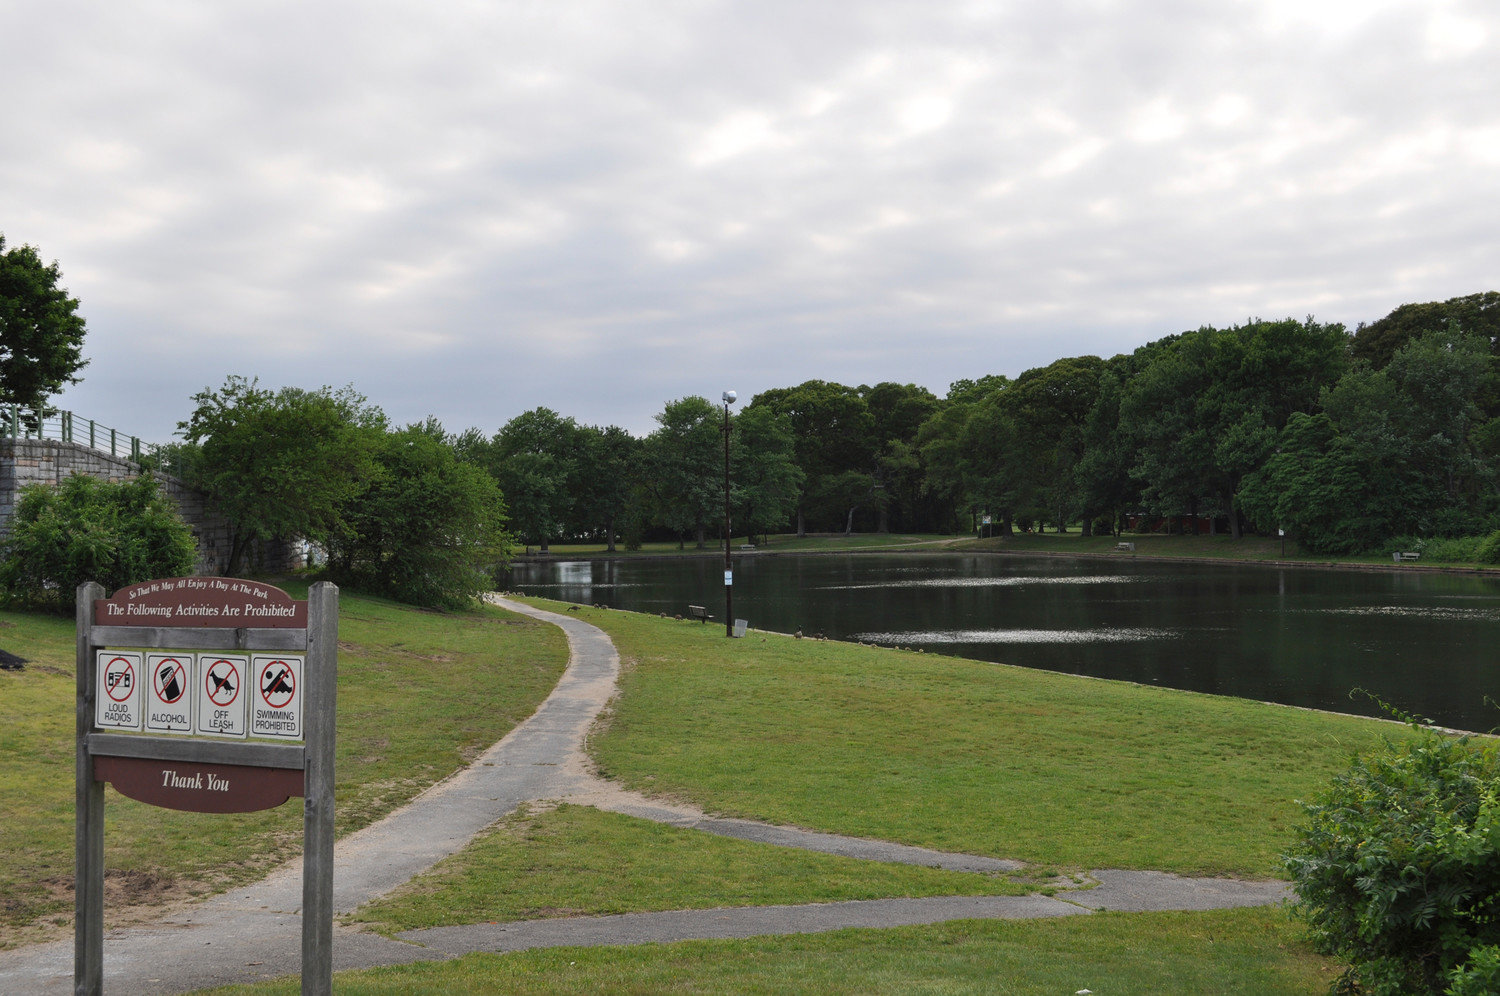 Big improvements have been made to Hempstead Lake State Park.